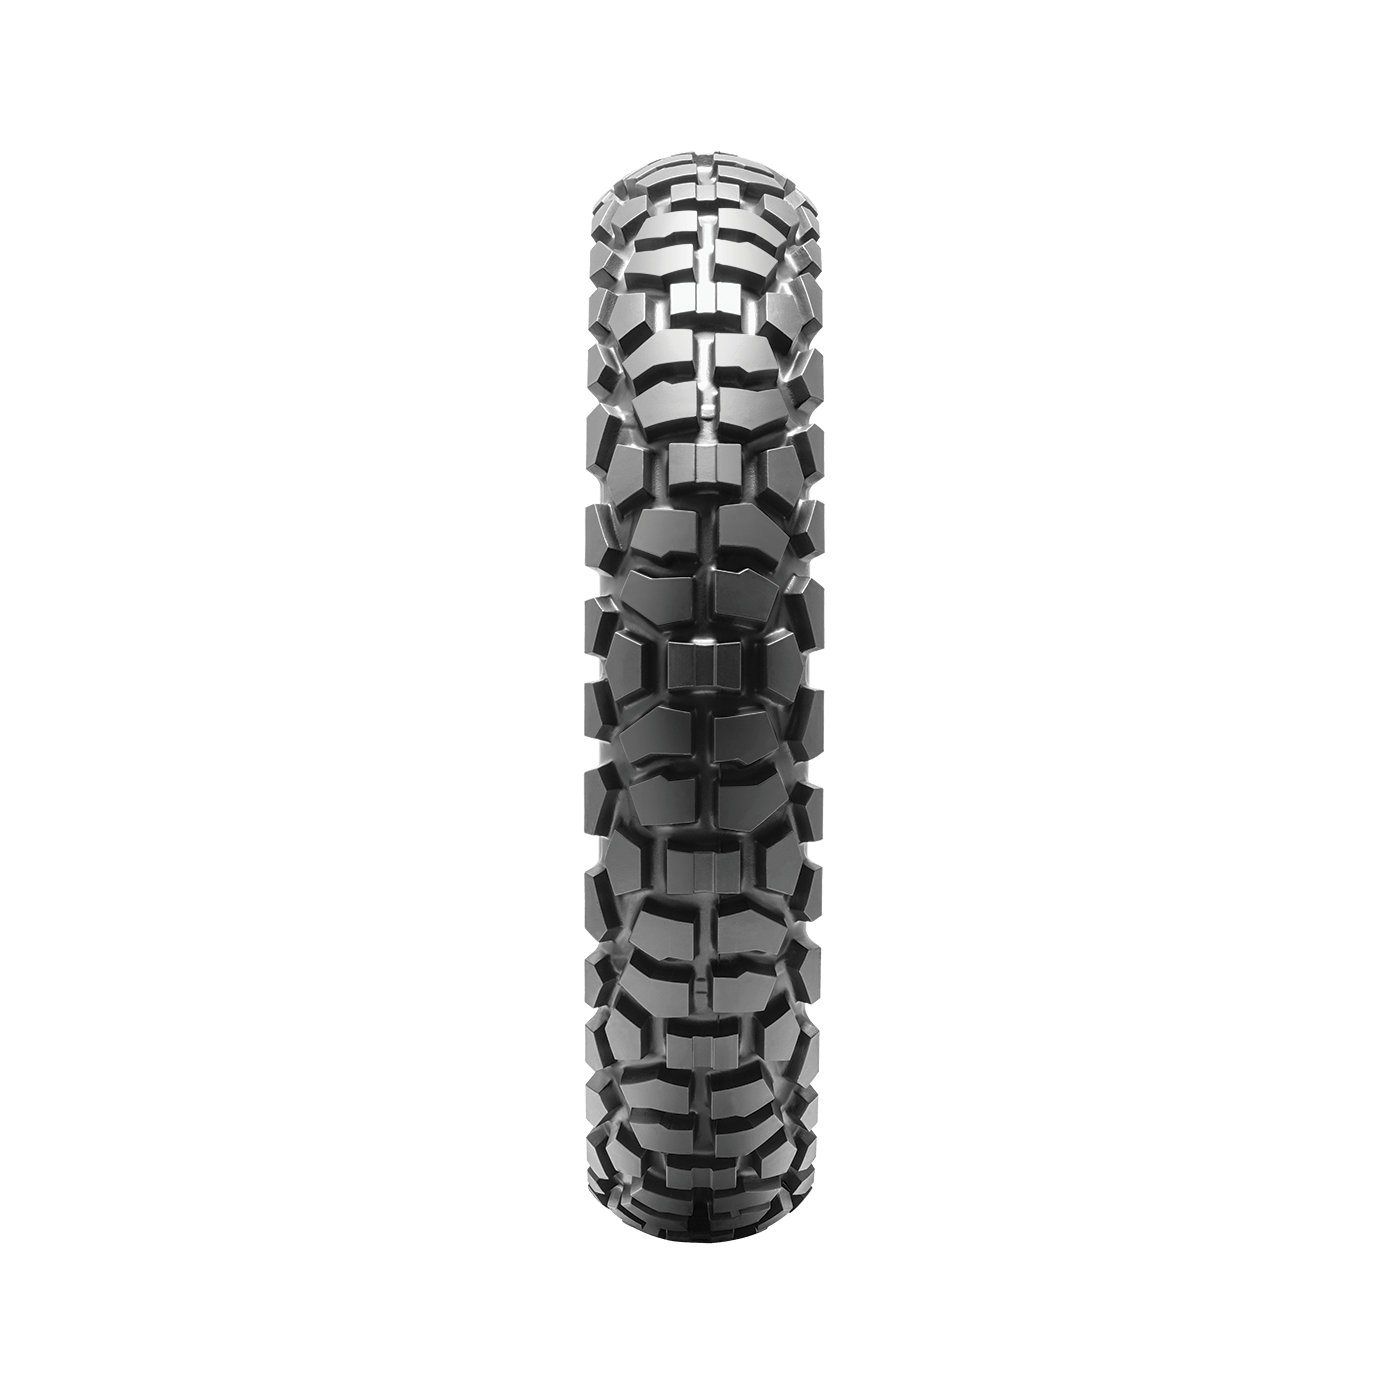 D605 Tires Are Available At Your Local Dunlop Motorcycle Dealer